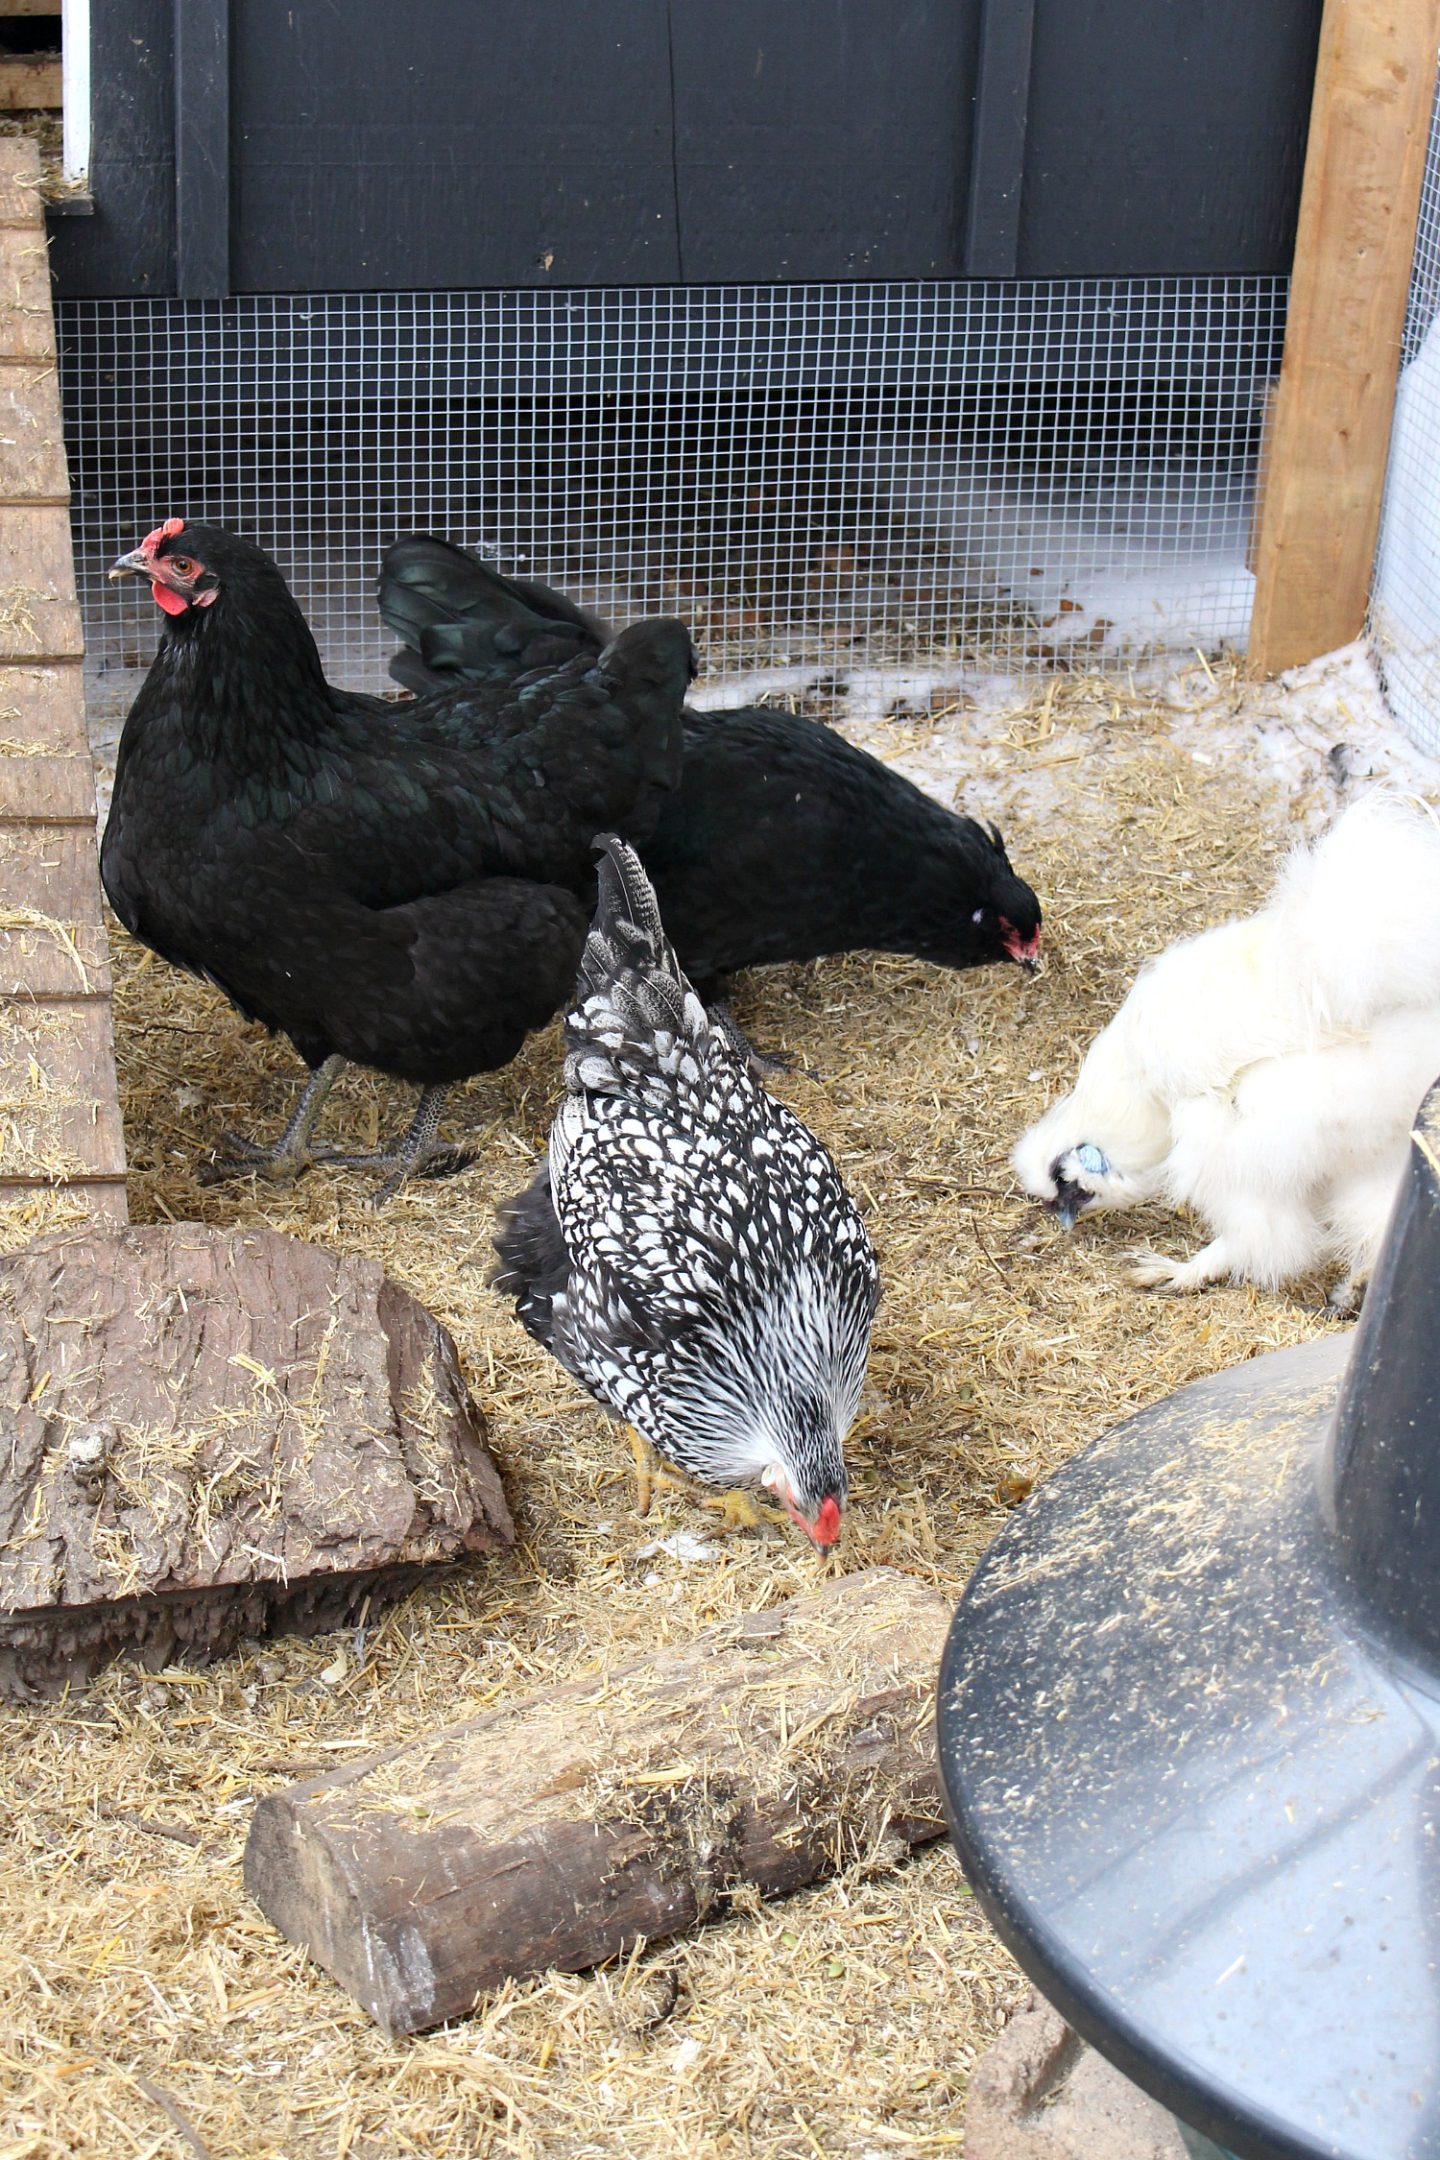 How We Keep Chickens Warm in Extreme Cold Winter Weather